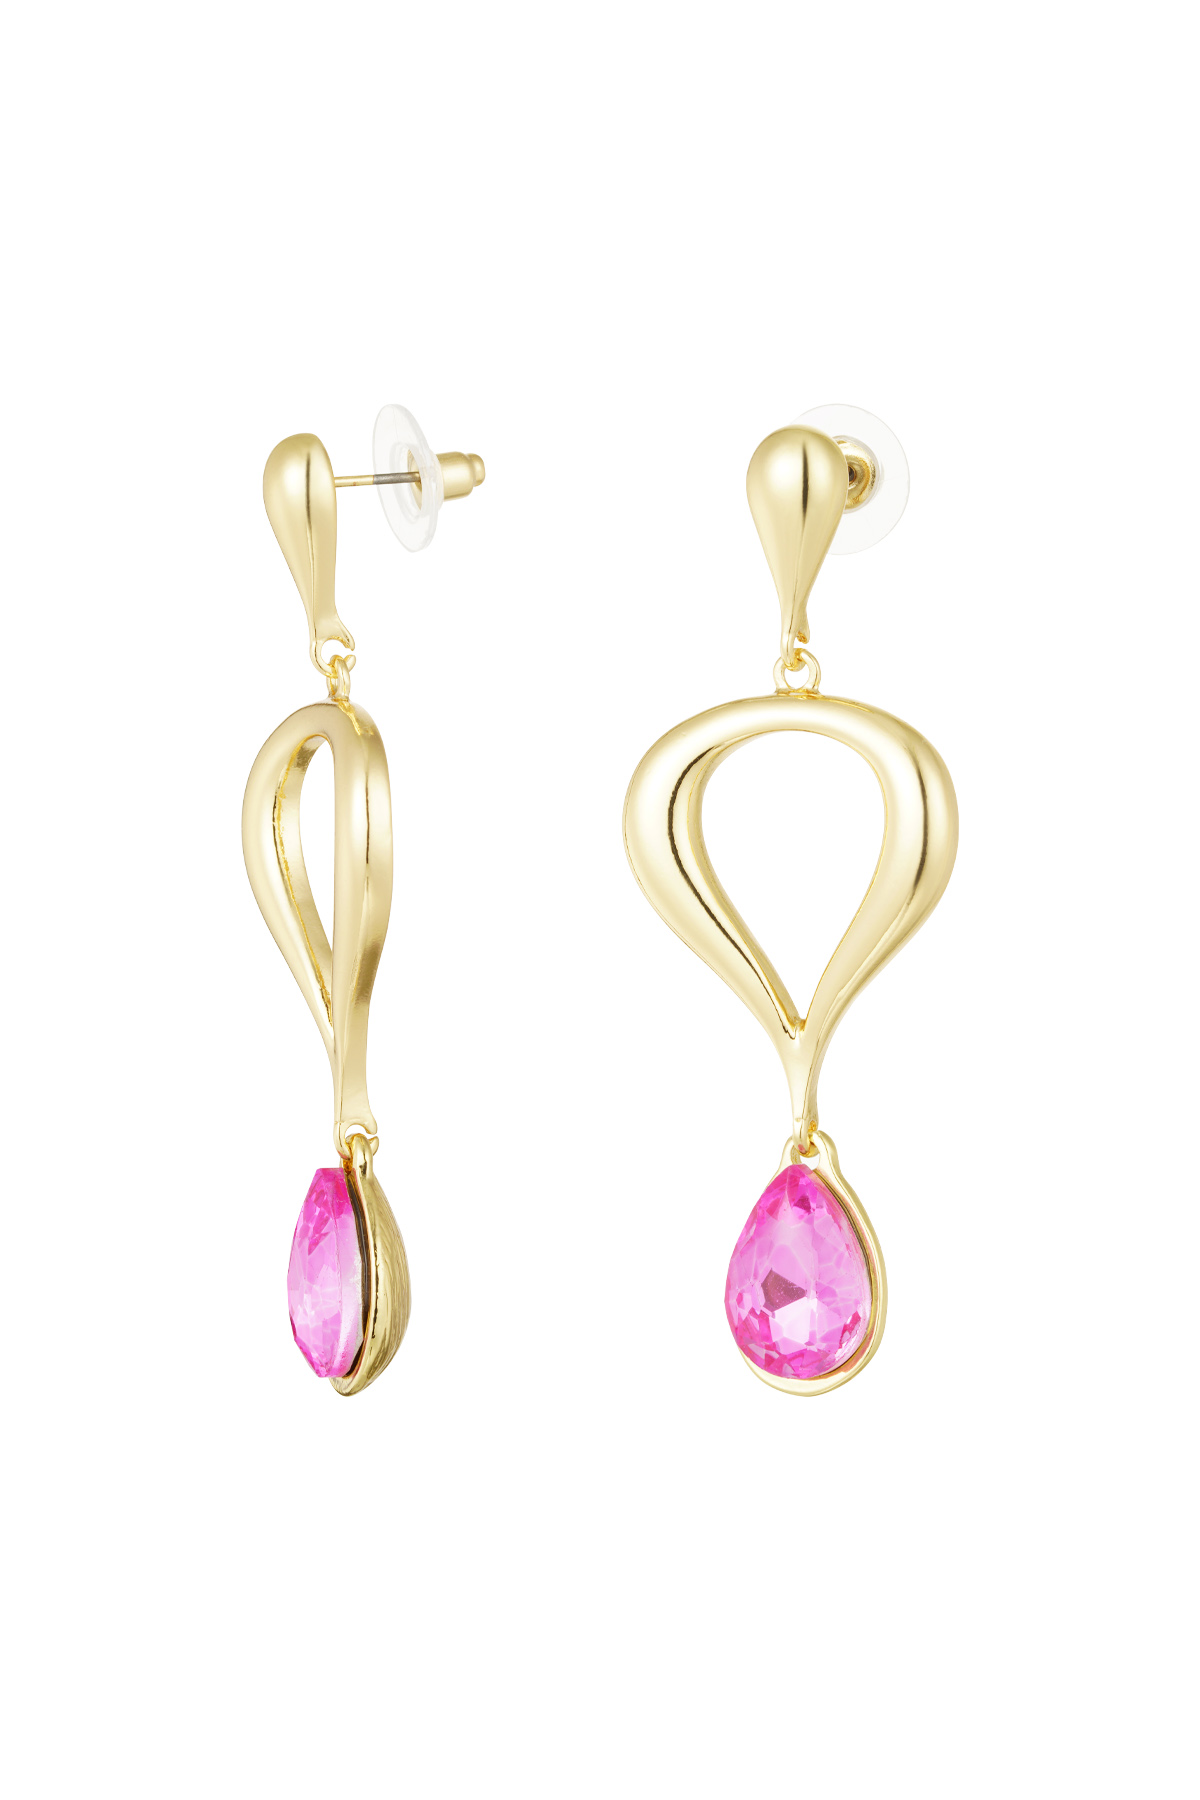 Classic earring with colored pendant - pink, gold 